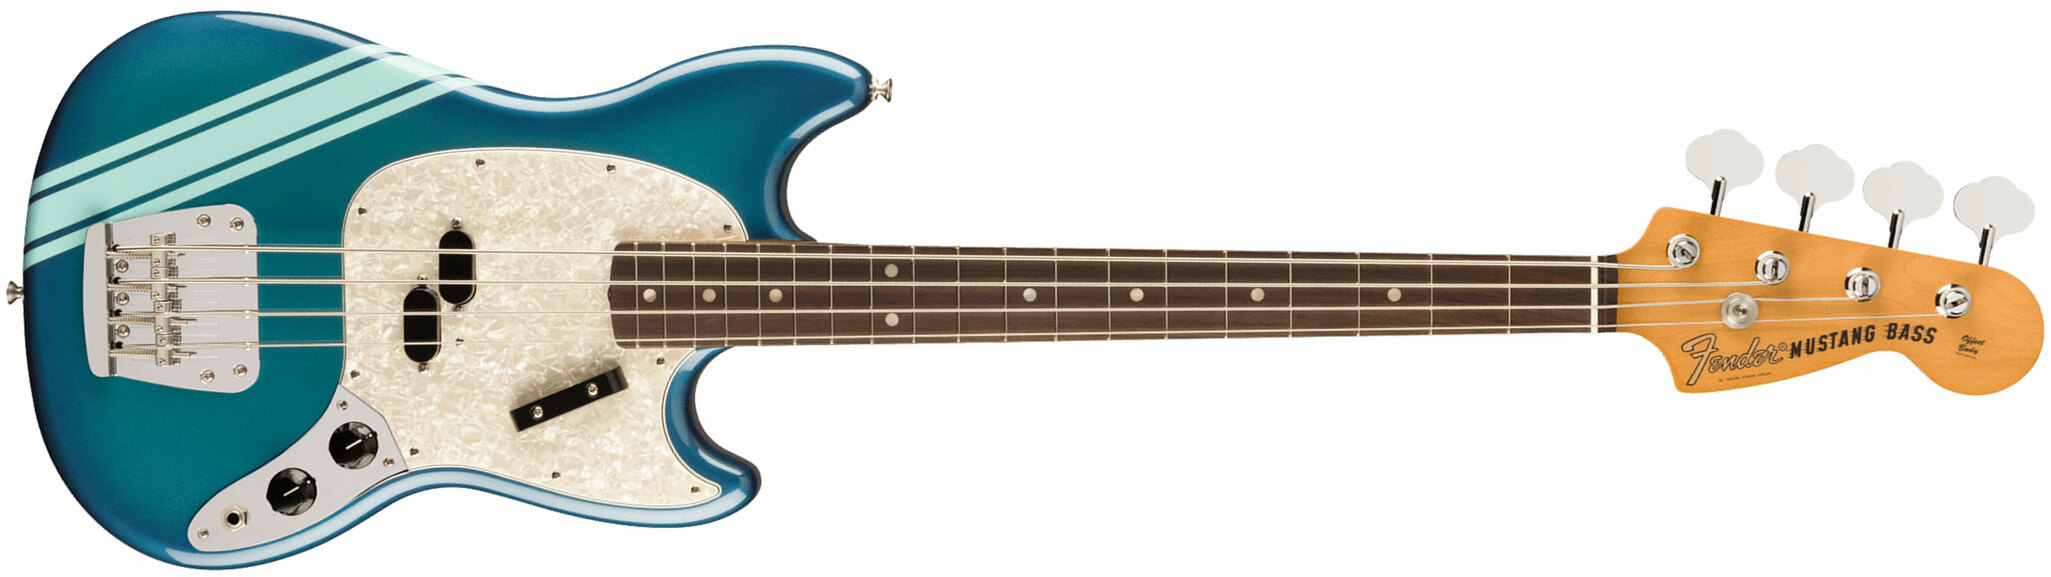 Fender Mustang Bass 70s Competition Vintera 2 Rw - Competition Blue - Solid body elektrische bas - Main picture